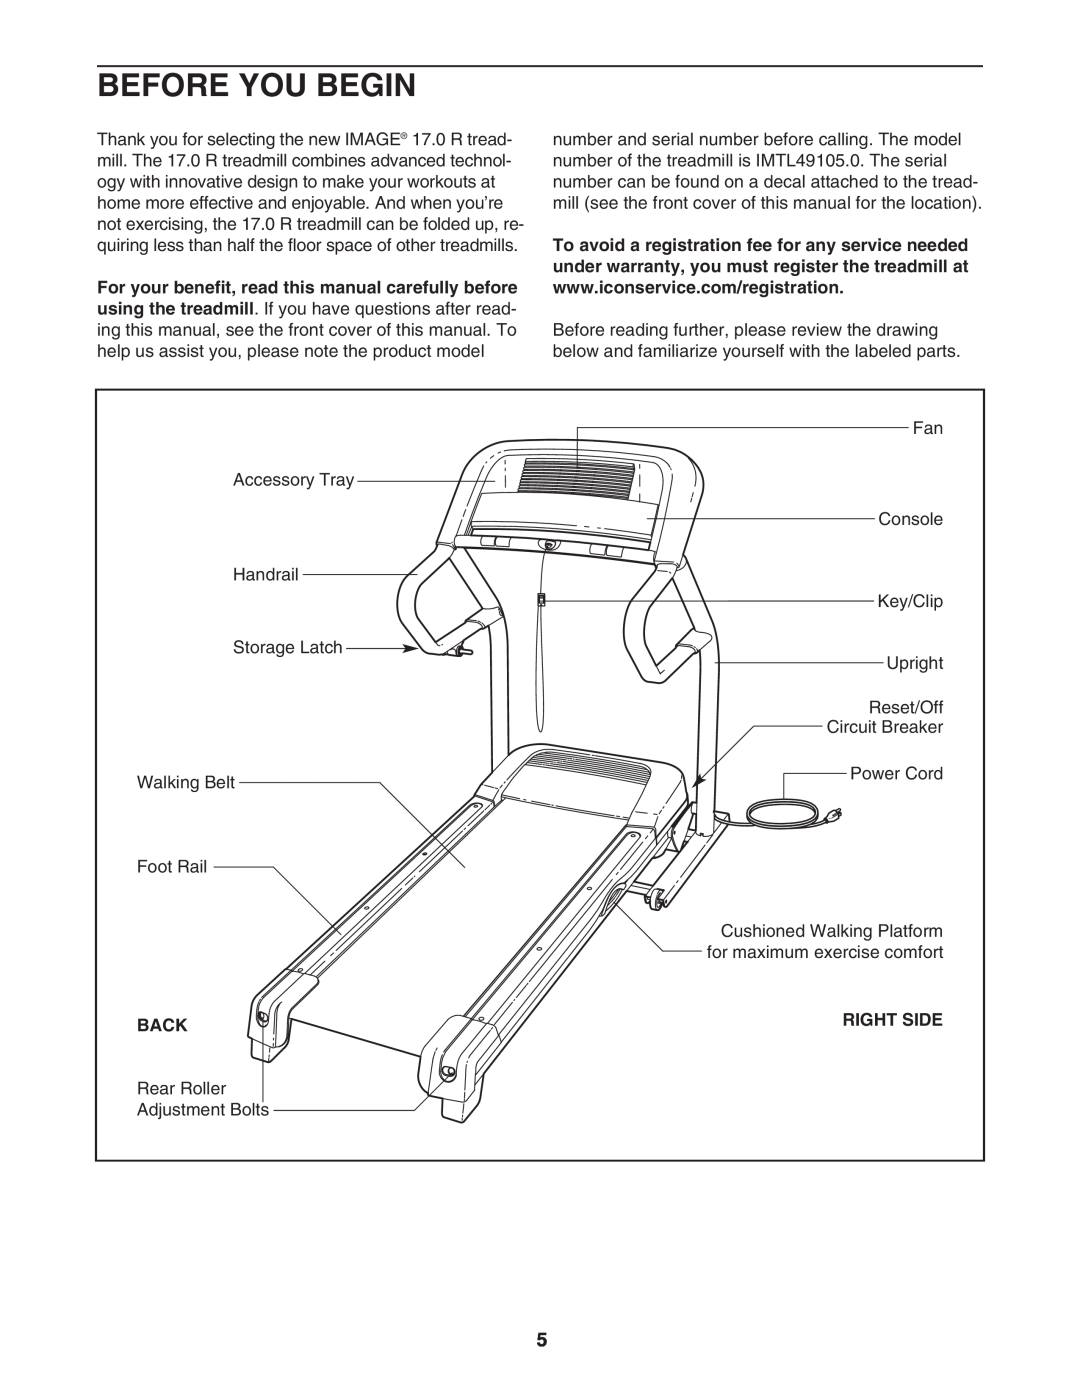 Image IMTL49105.0 user manual Before You Begin, Back, Right Side 